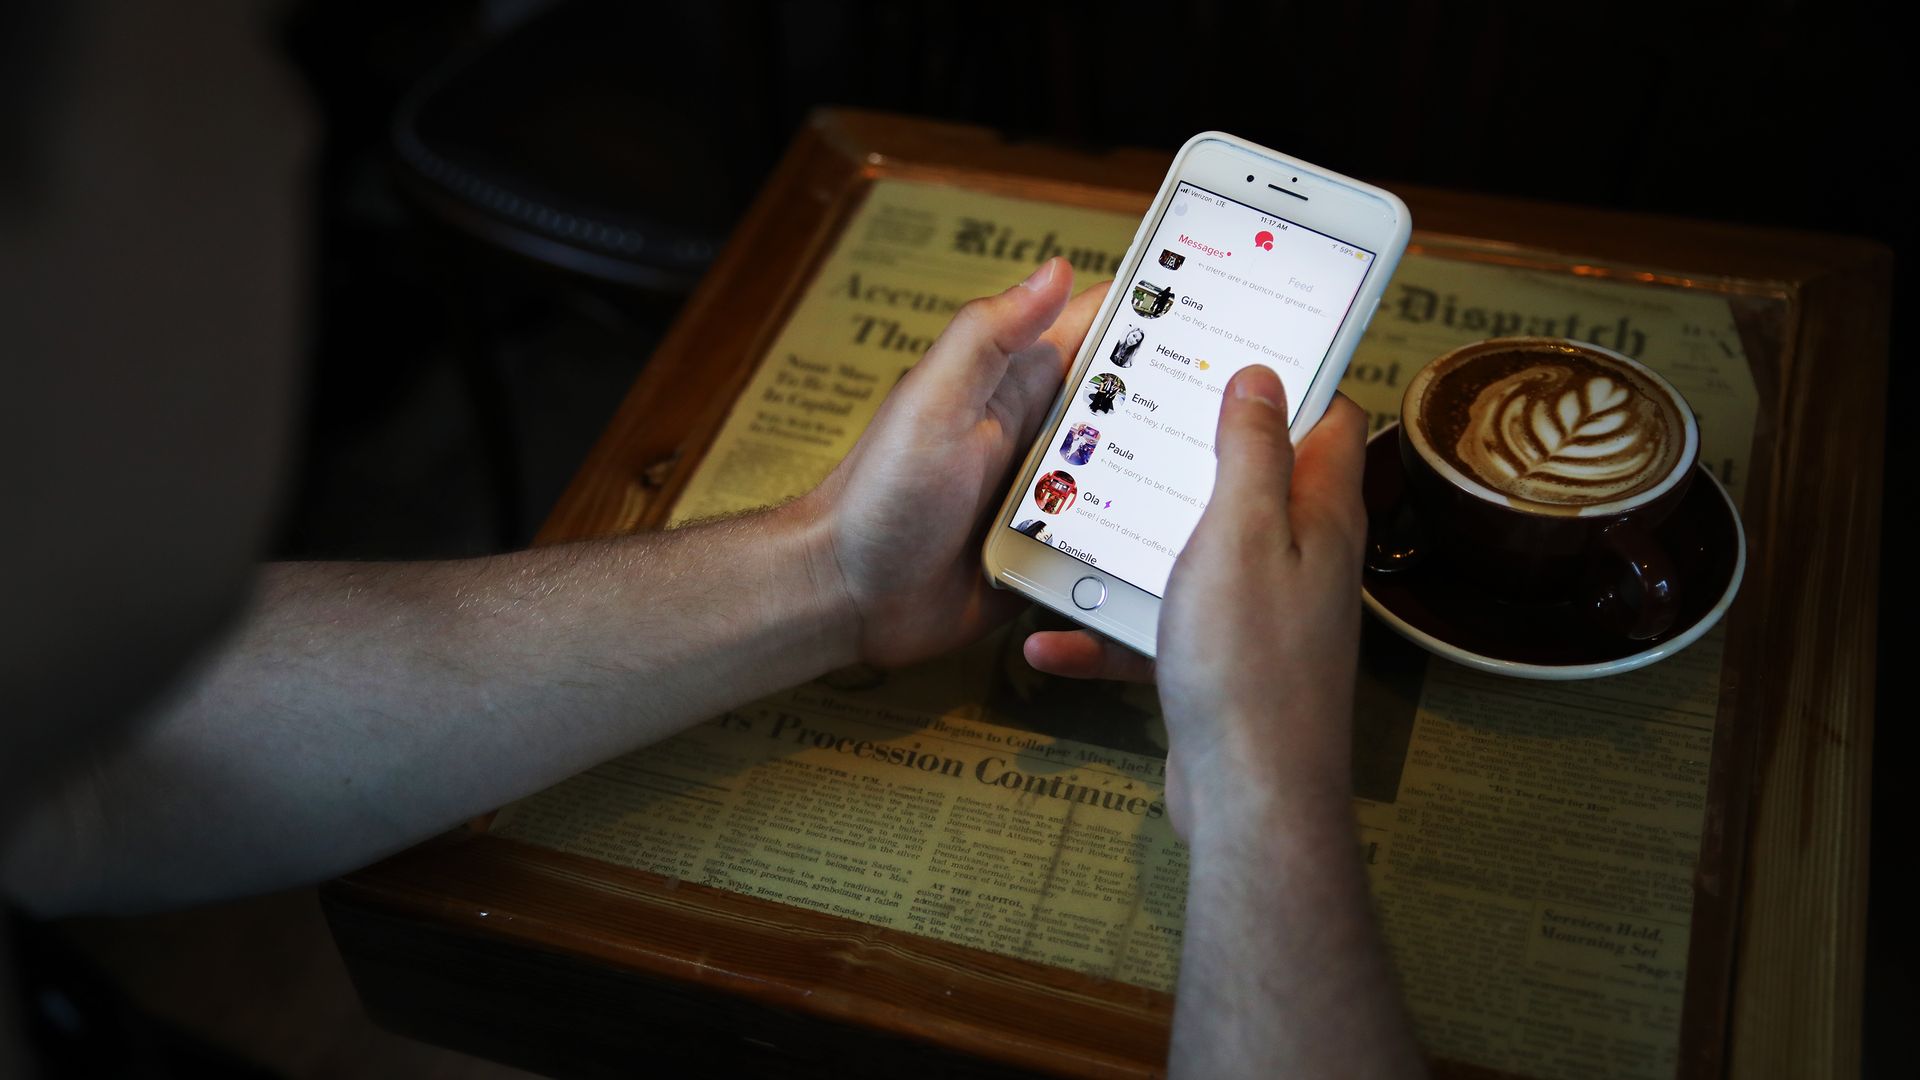 A person uses Tinder next to a cup of coffee